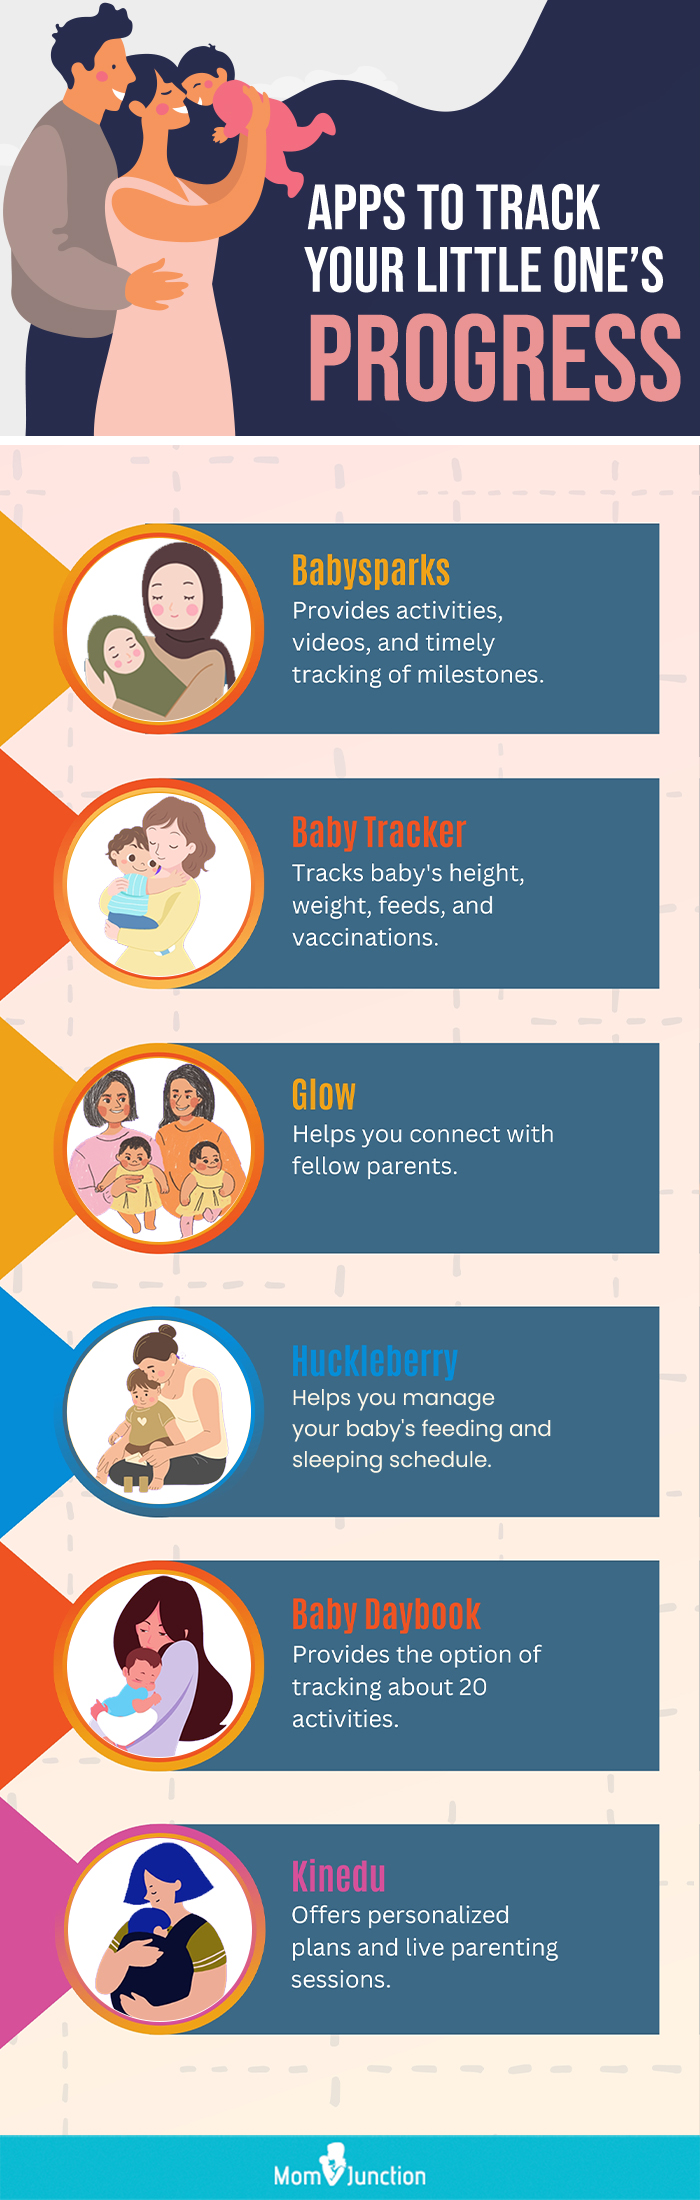 apps to track your little ones progress (infographic)